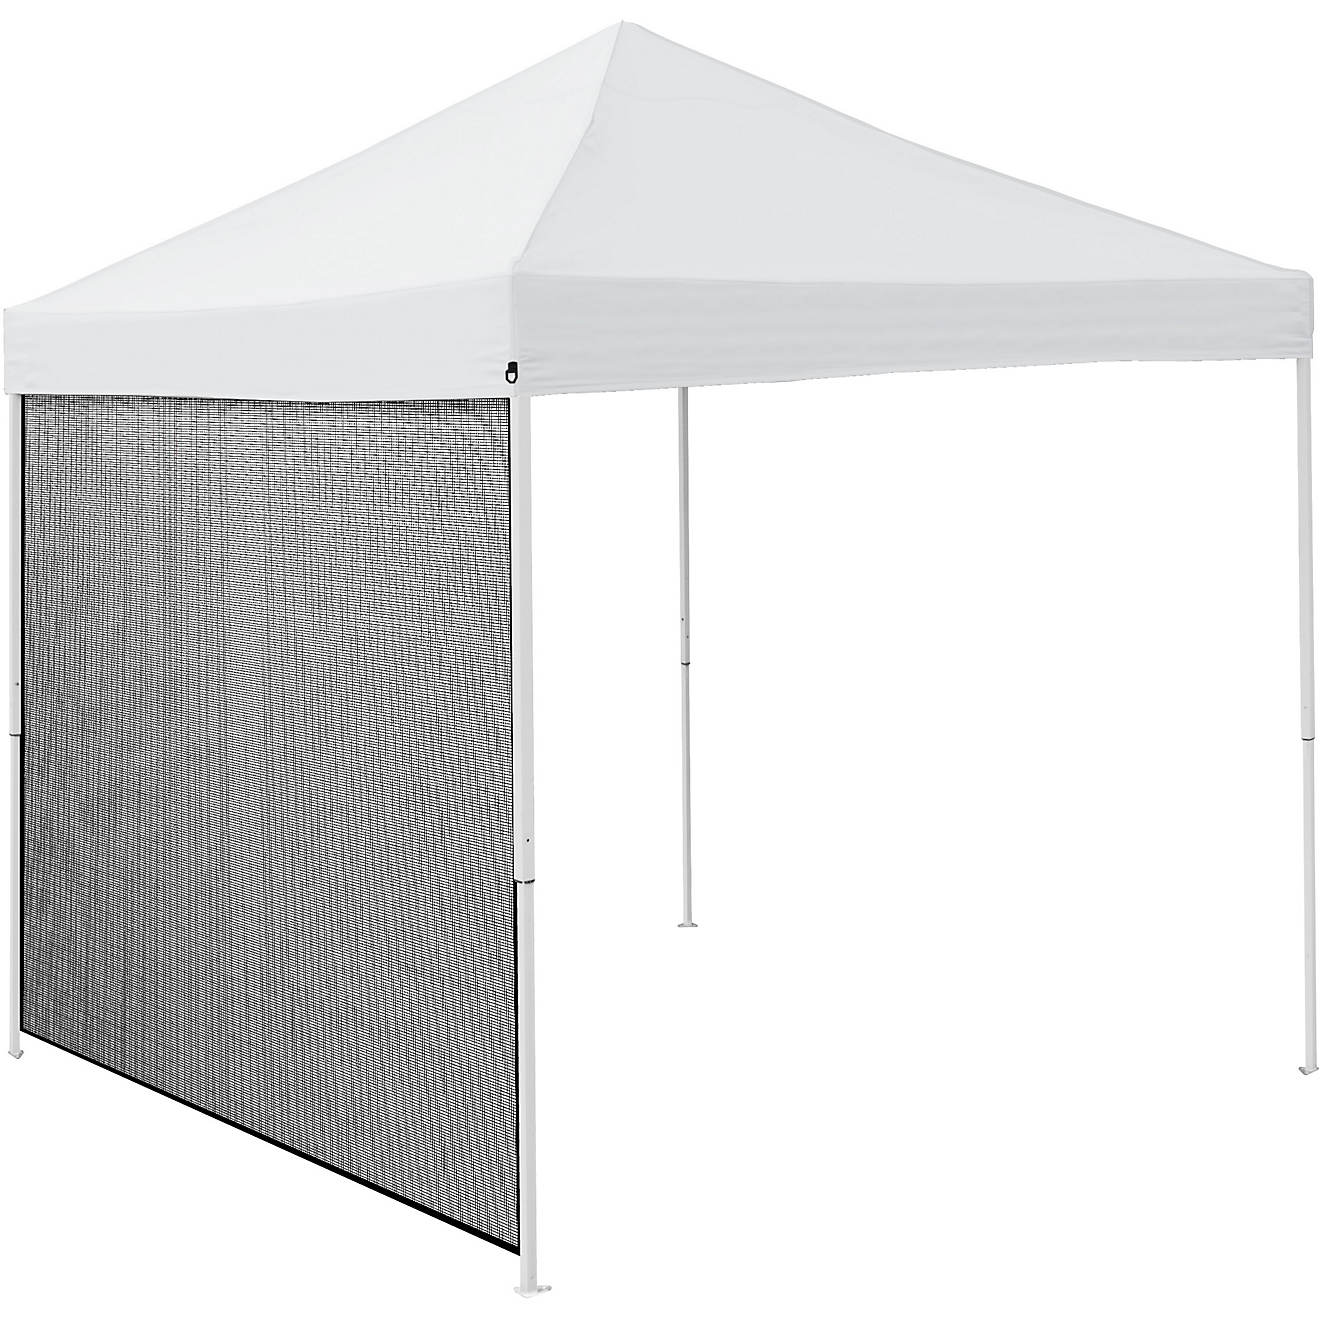 Academy Sports + Outdoors 10 x 10 Mesh Straight Leg Canopy Sunshade Sidewall                                                     - view number 1